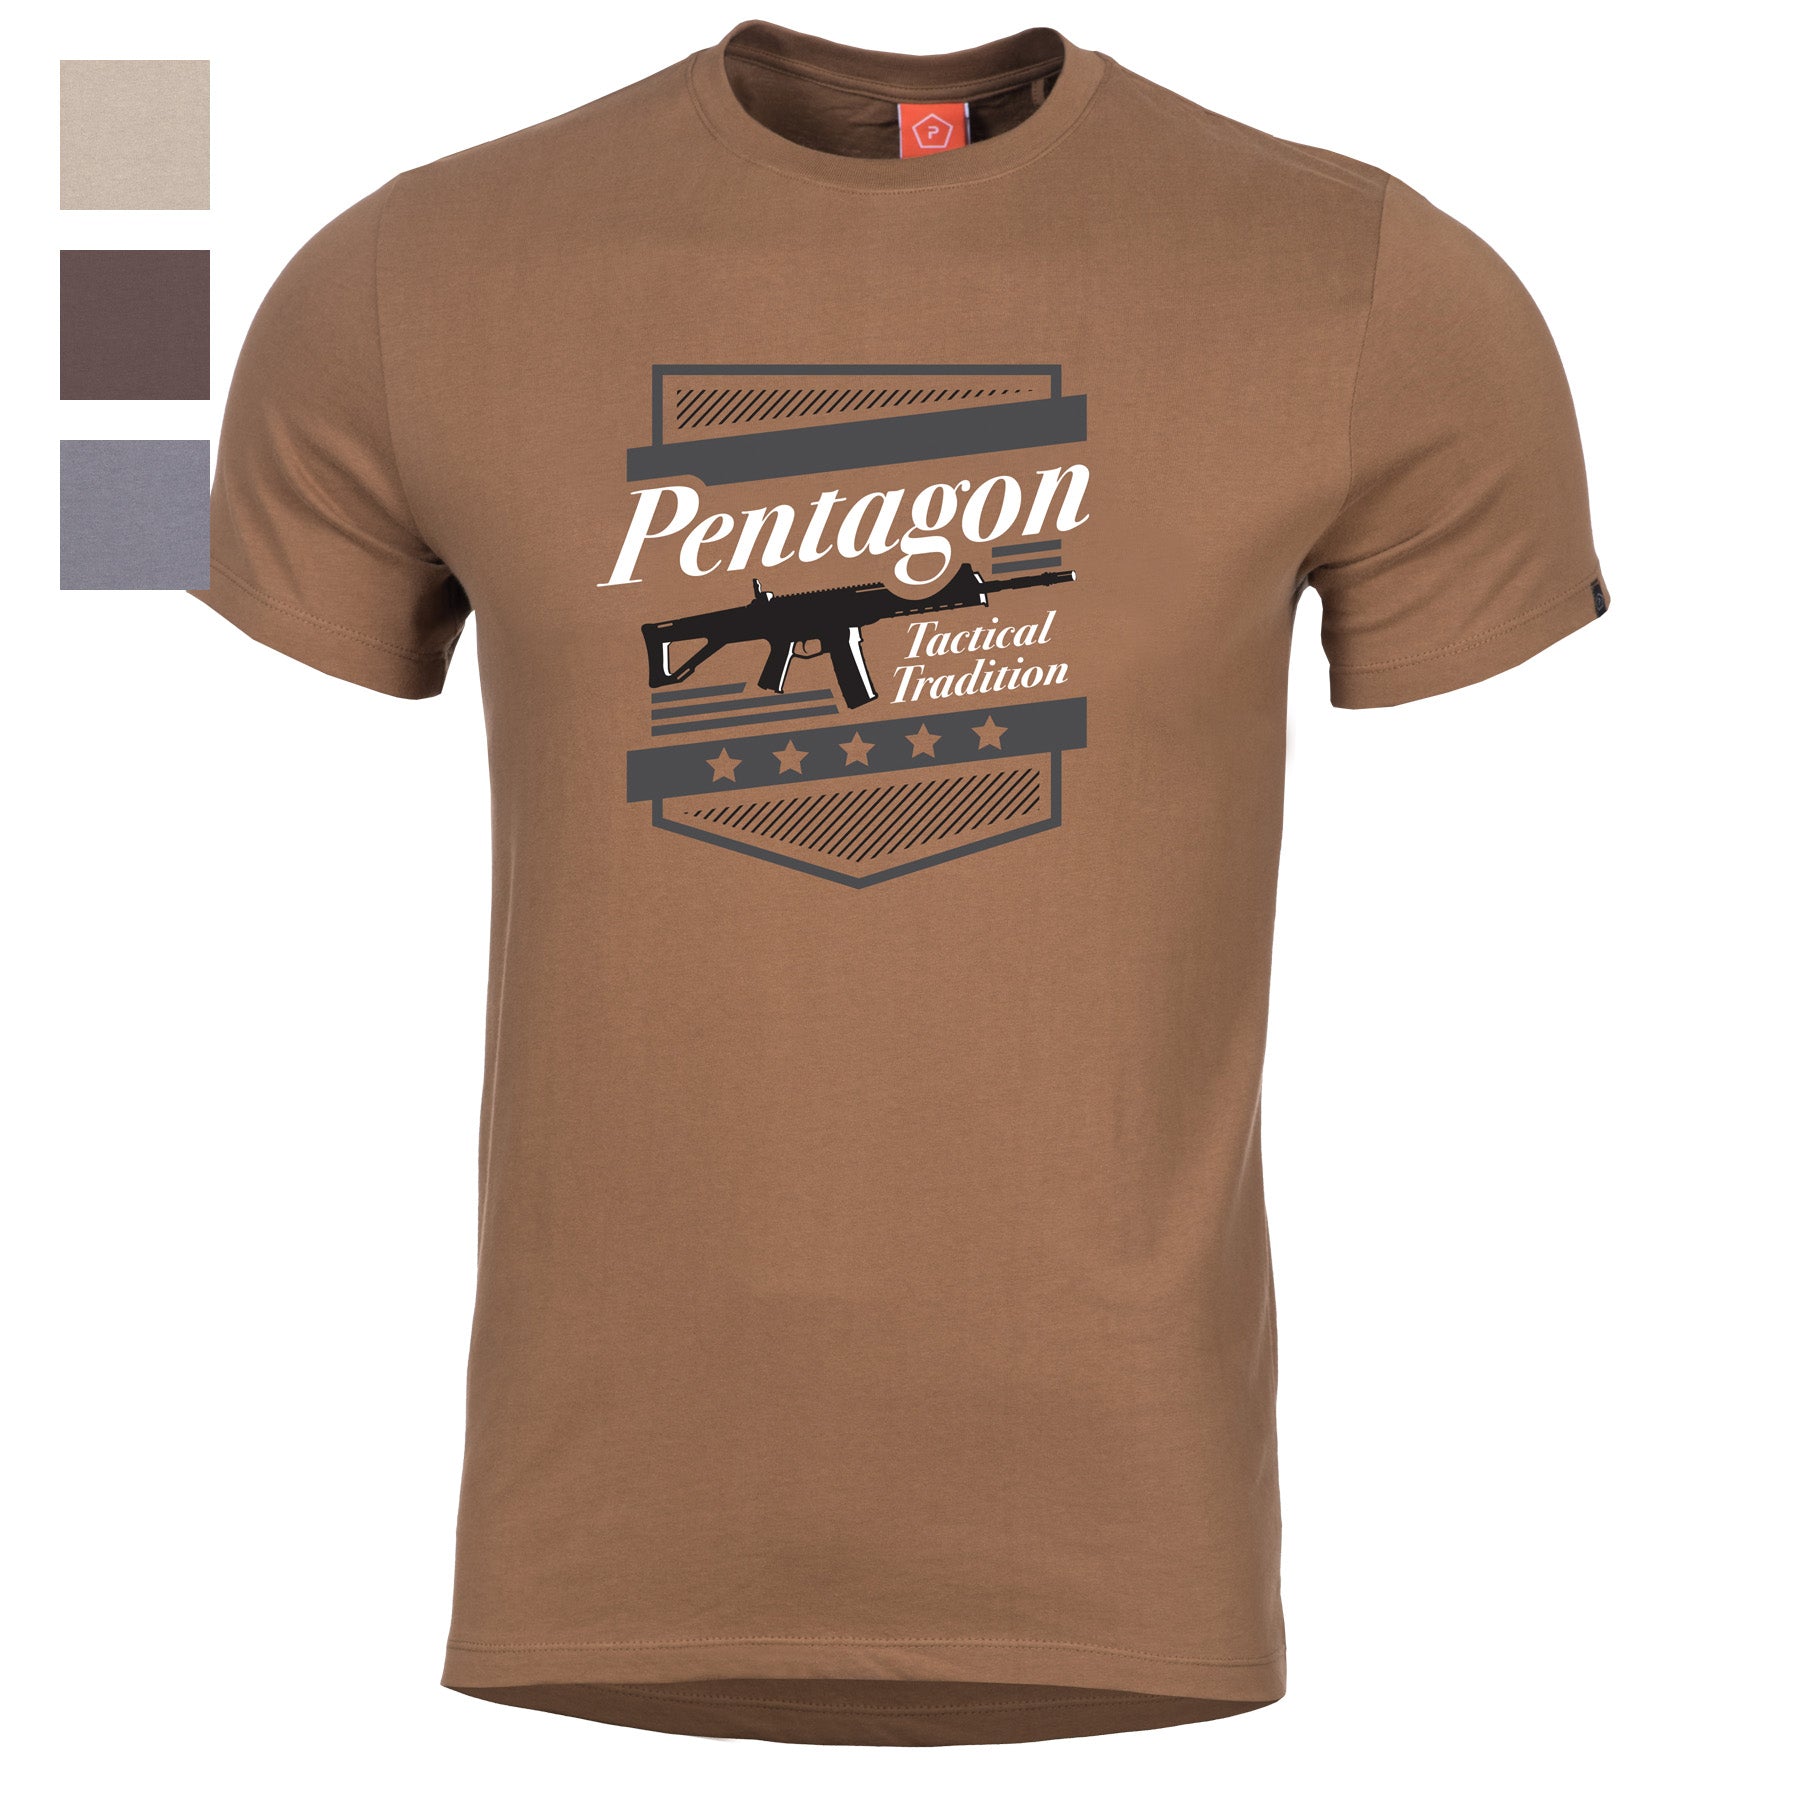 Pentagon-T-Shirt-ACR-Ageron-Coyote-Farbauswahl